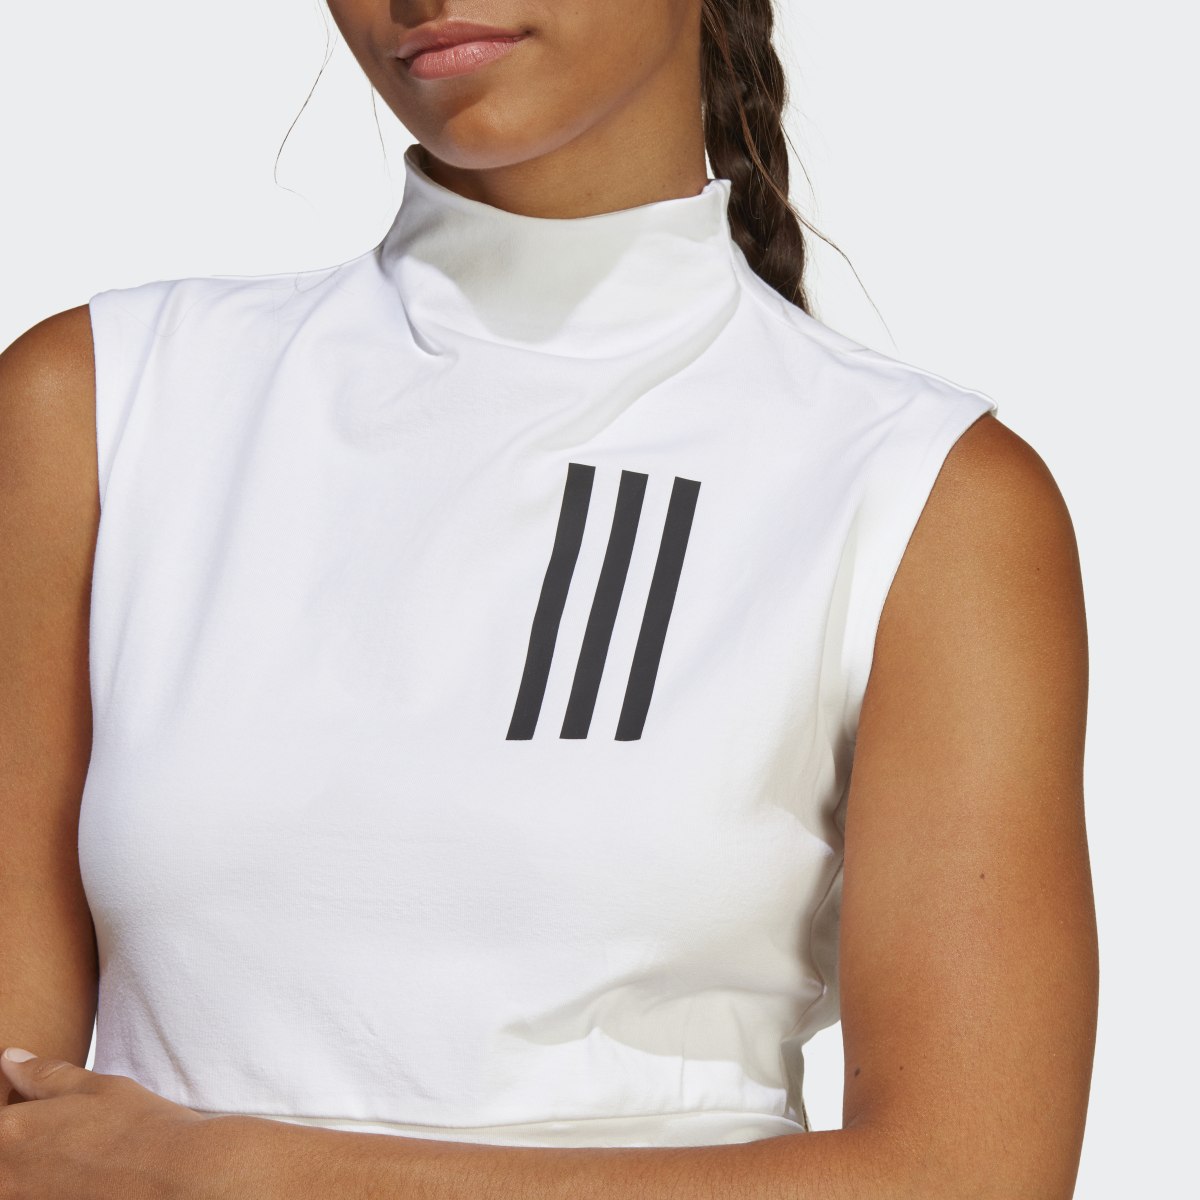 Adidas Top Mission Victory Sleeveless Cropped. 6